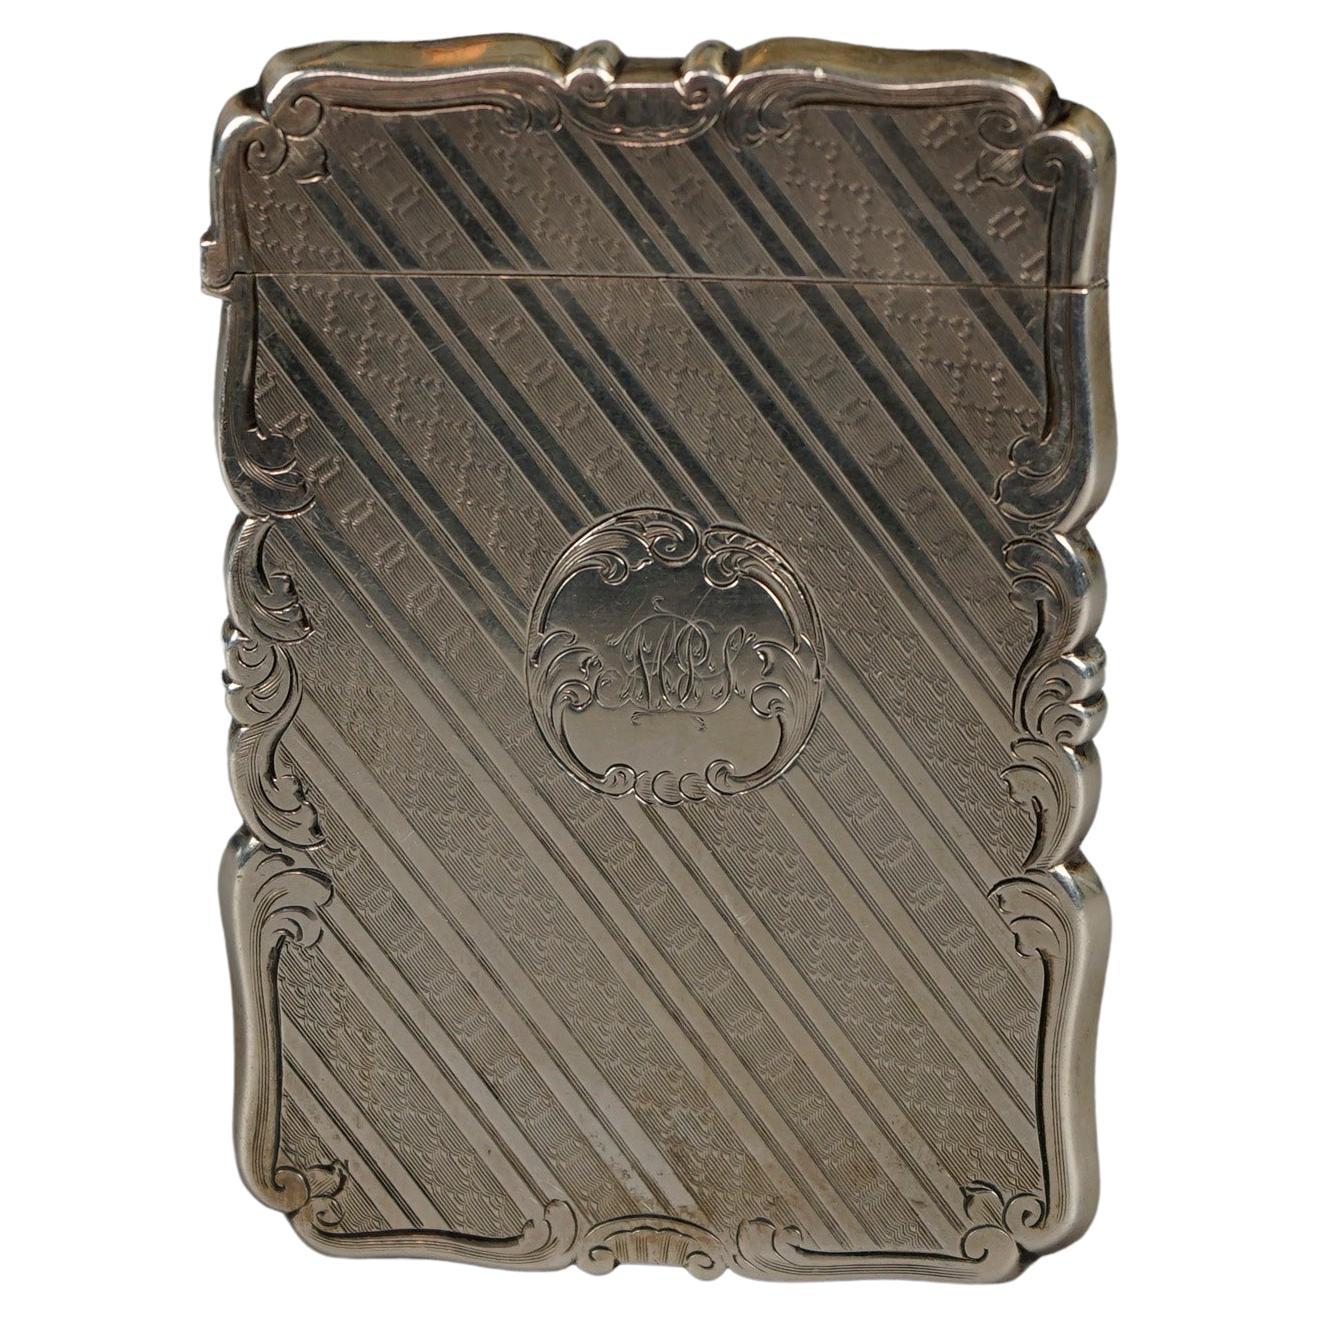 An antique Victorian calling card case offers sterling silver construction with foliate and scroll elements, monogrammed as photographed, c1890, 1.53 toz

Measures- 3.5''H x .25''W x 2.5''D.